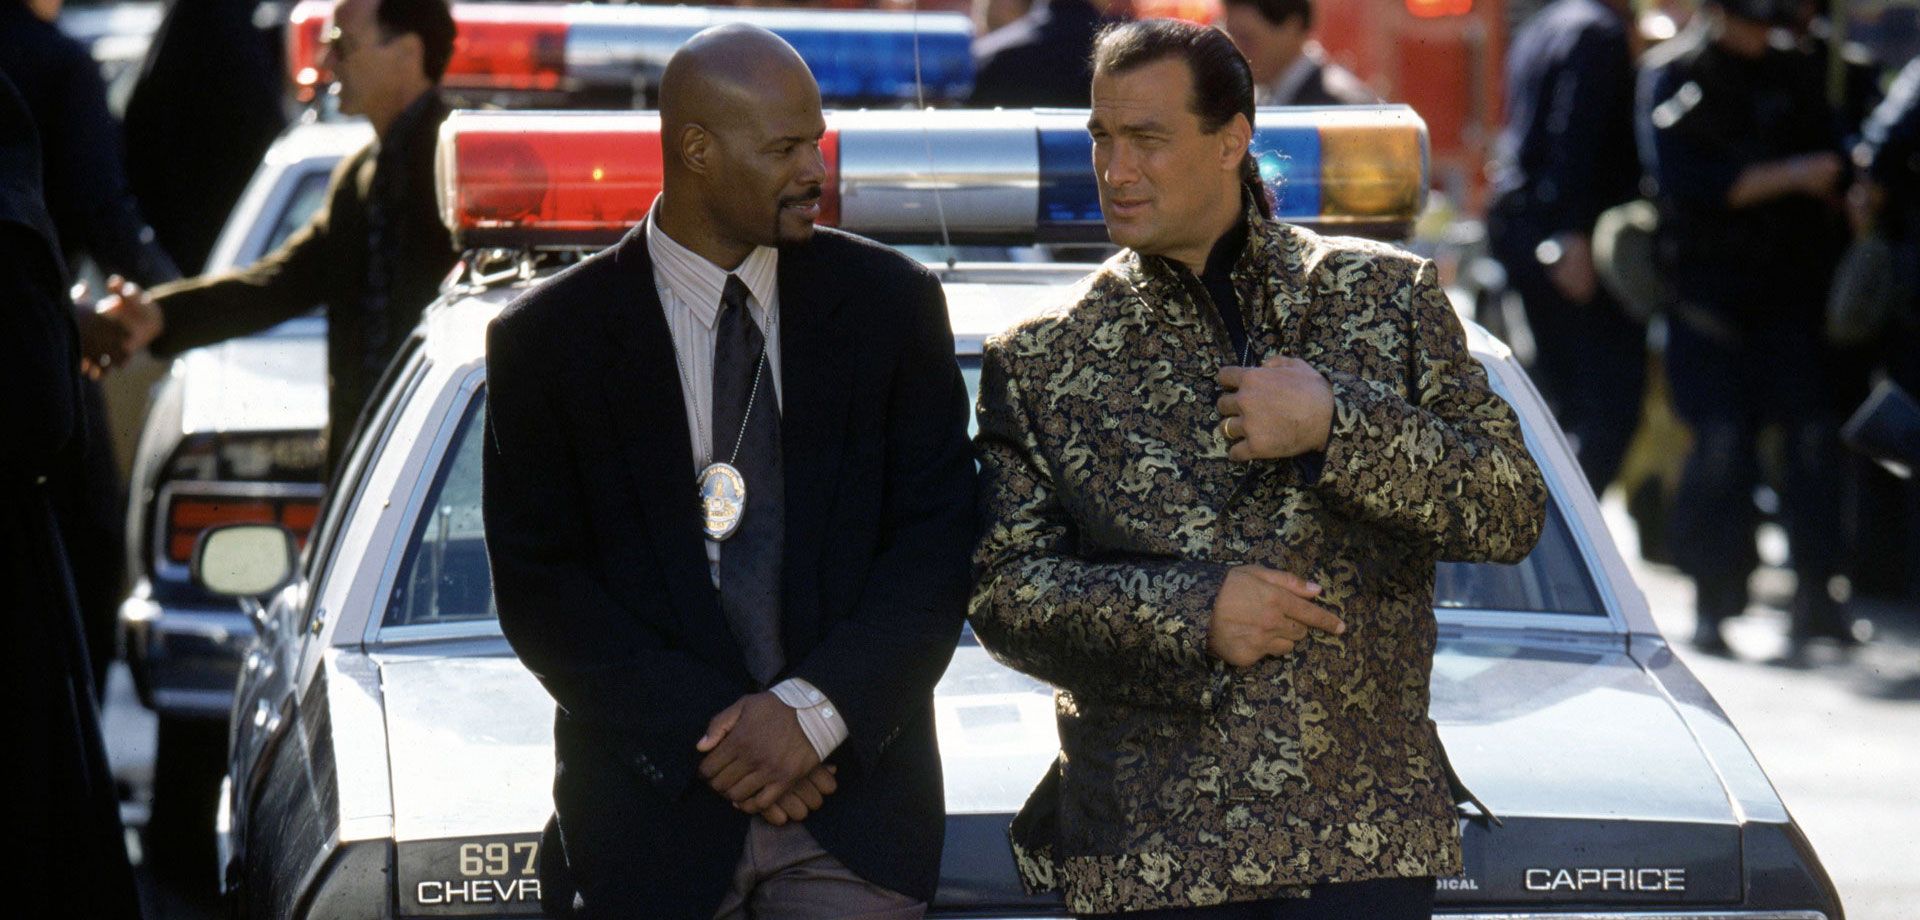 Steven Seagal’s 10 Most Badass Characters Ranked